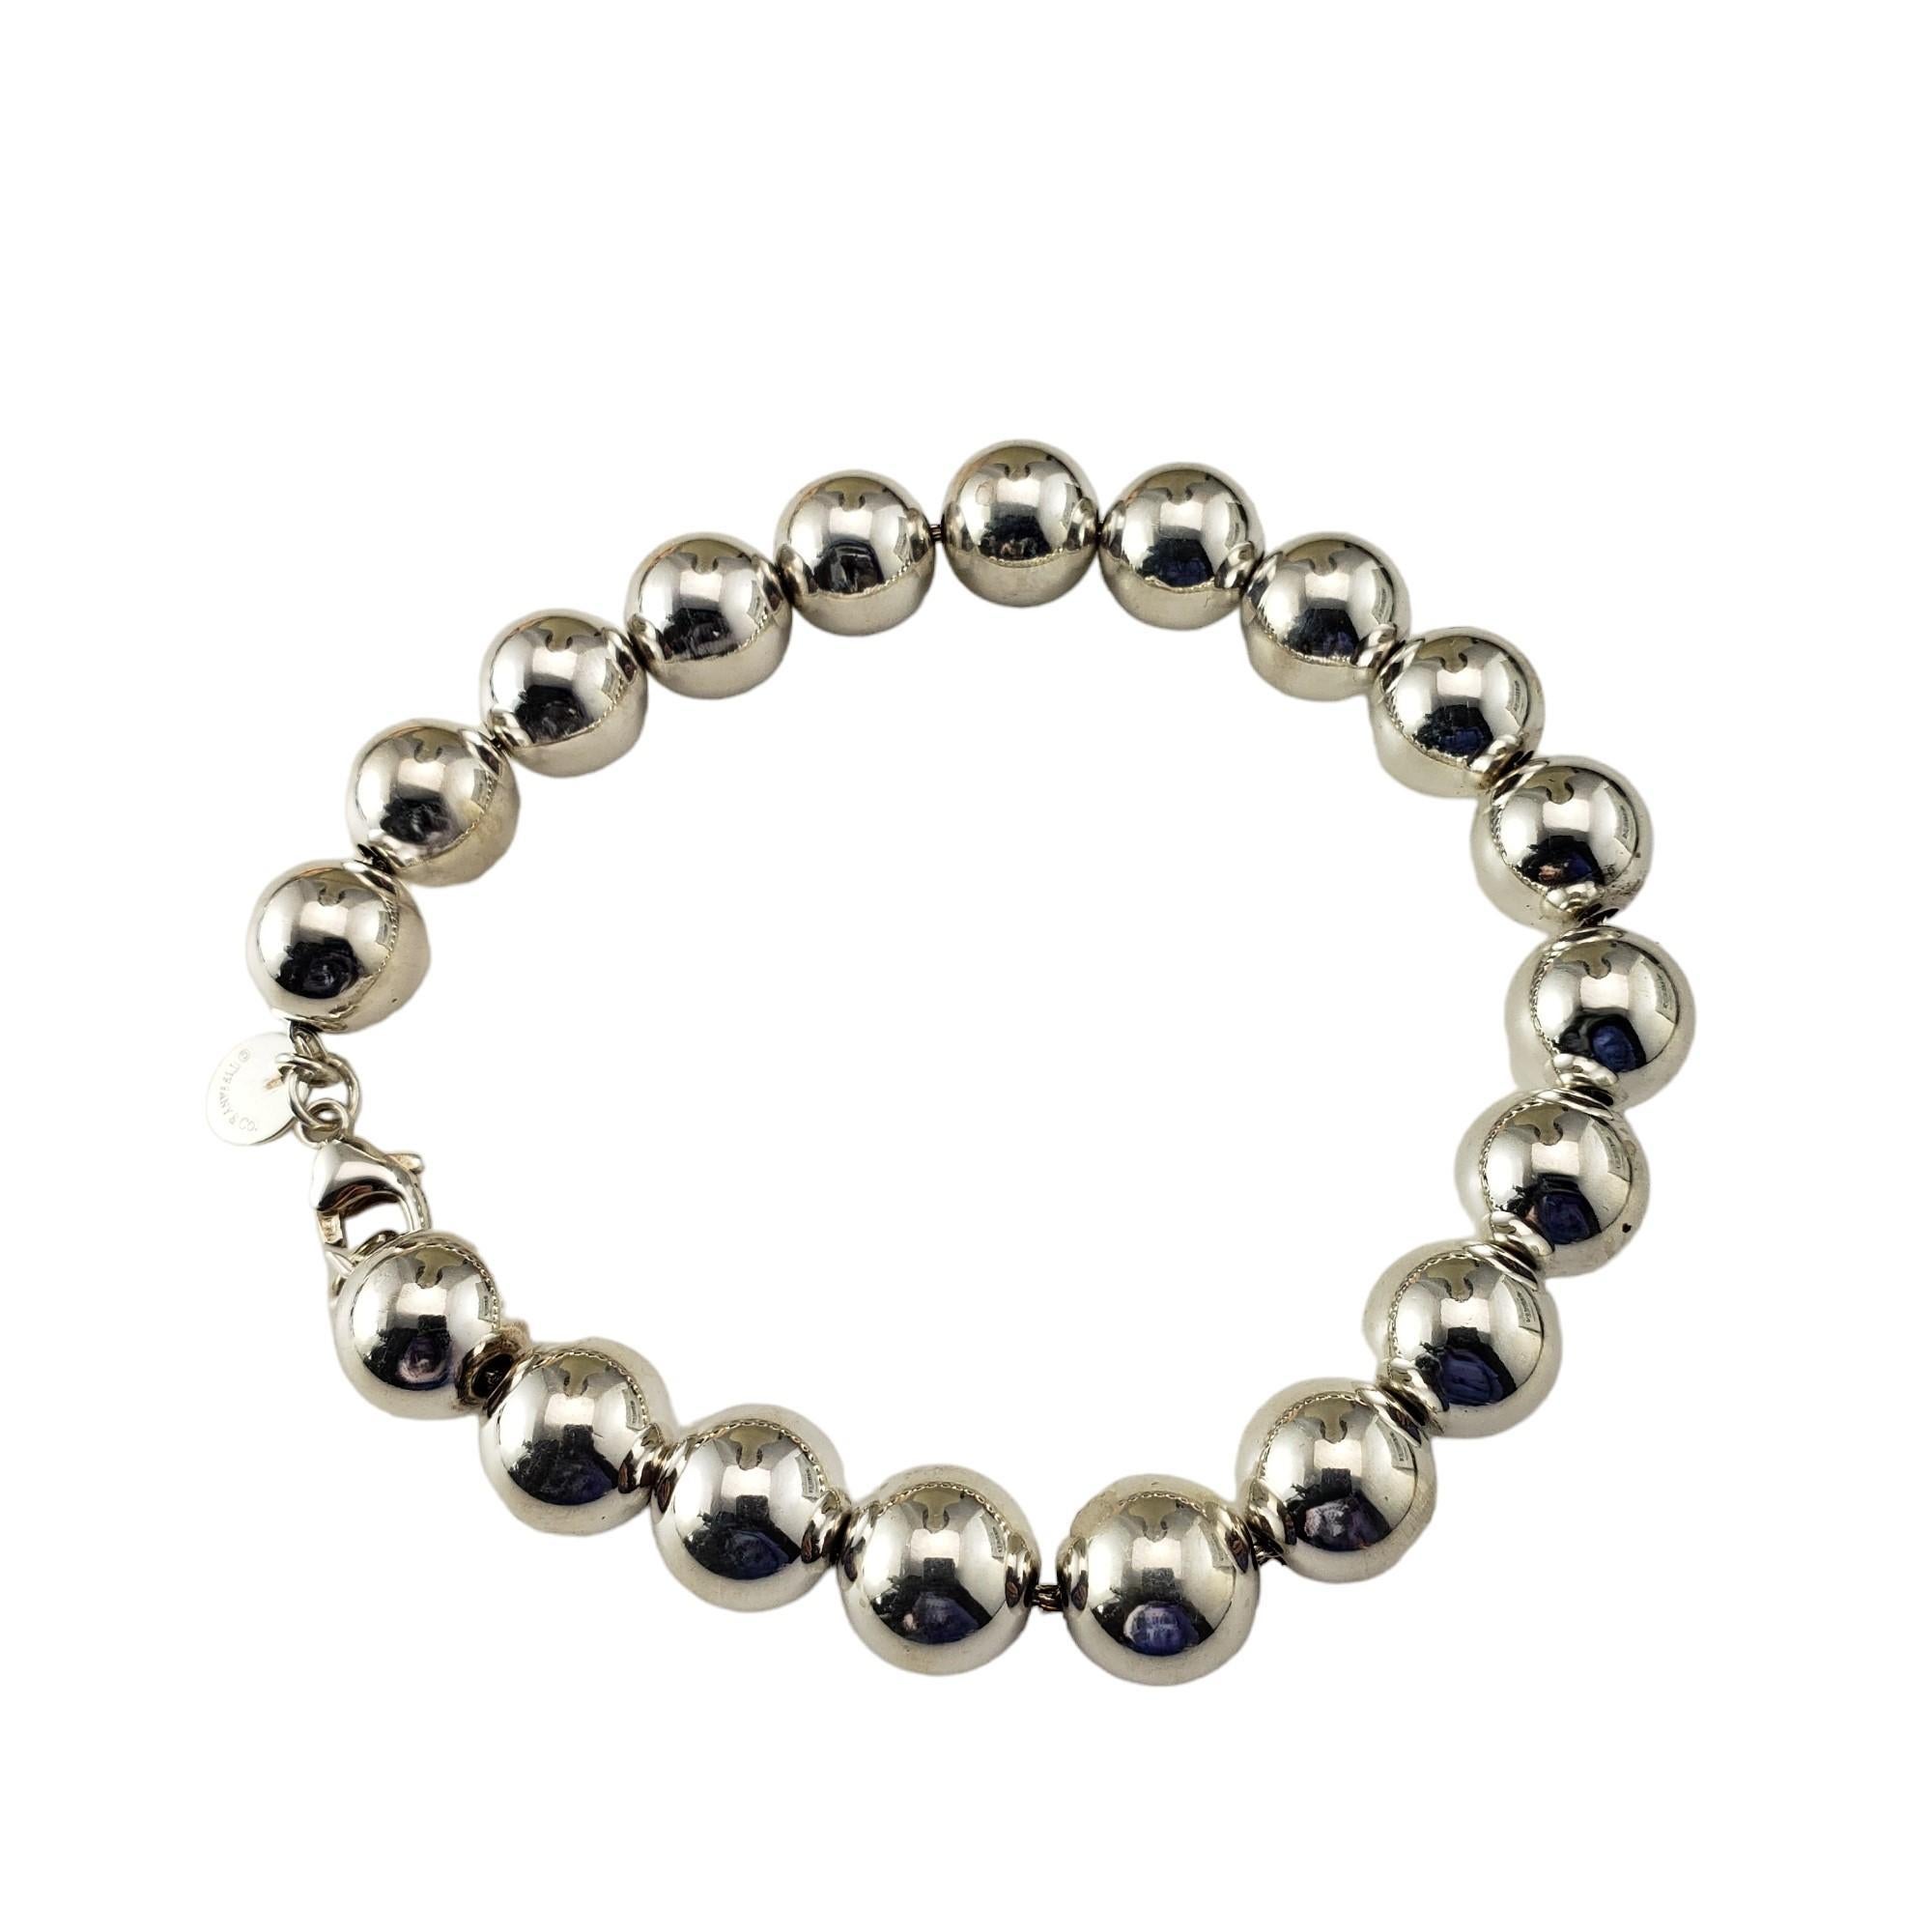 Vintage Tiffany & Co. Sterling Silver Ball Bracelet

This lovely bracelet by Tiffany & Co. is crafted in classic sterling silver.  

Width:  10 mm.

Matching  necklace: #17162
Matching earrings: #17163

Size:  7.25 inches

Stamped: TIFFANY & CO.